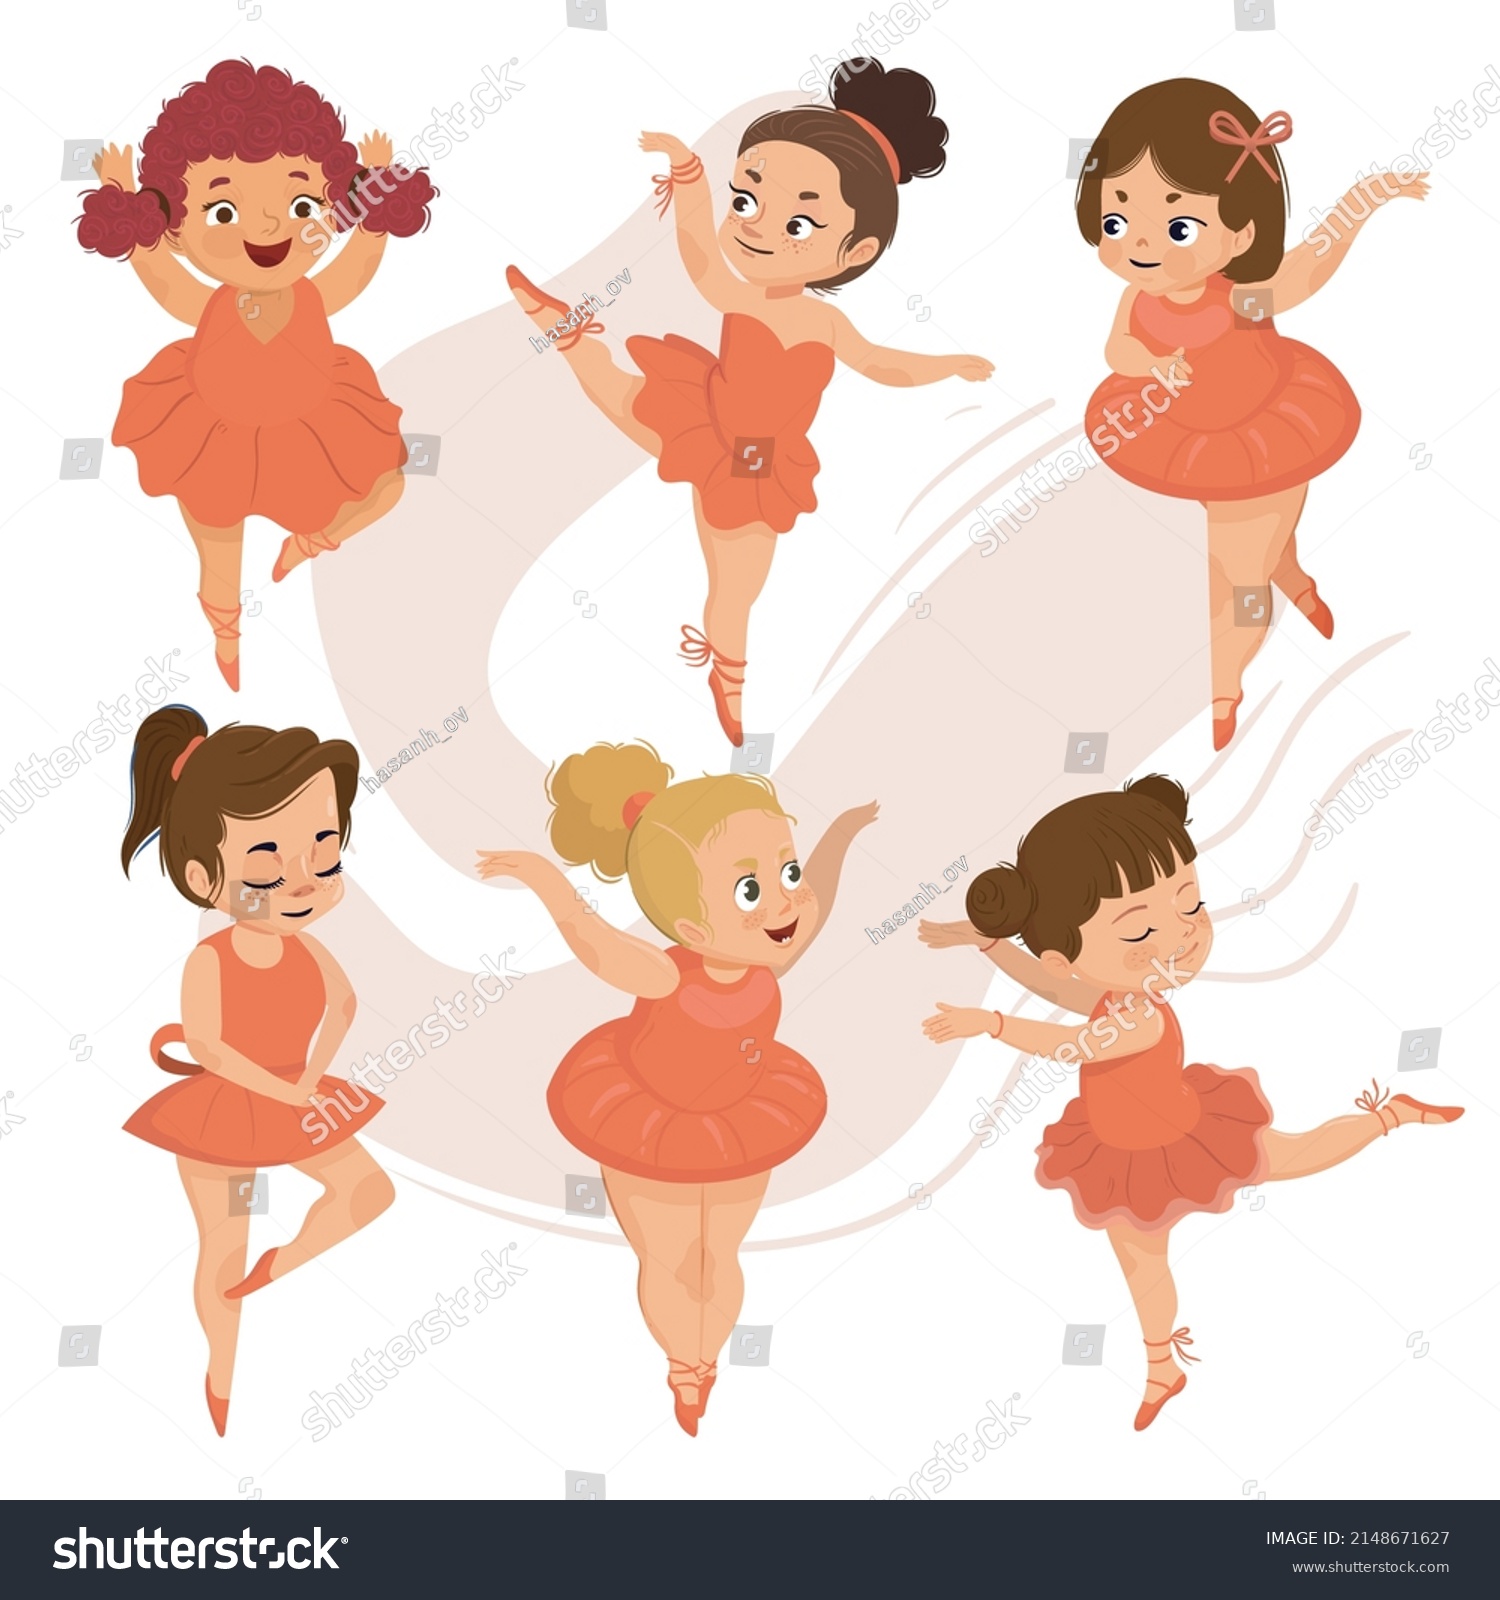 SVG of Ballerina icons cute girl sketch cartoon characters SVG svg